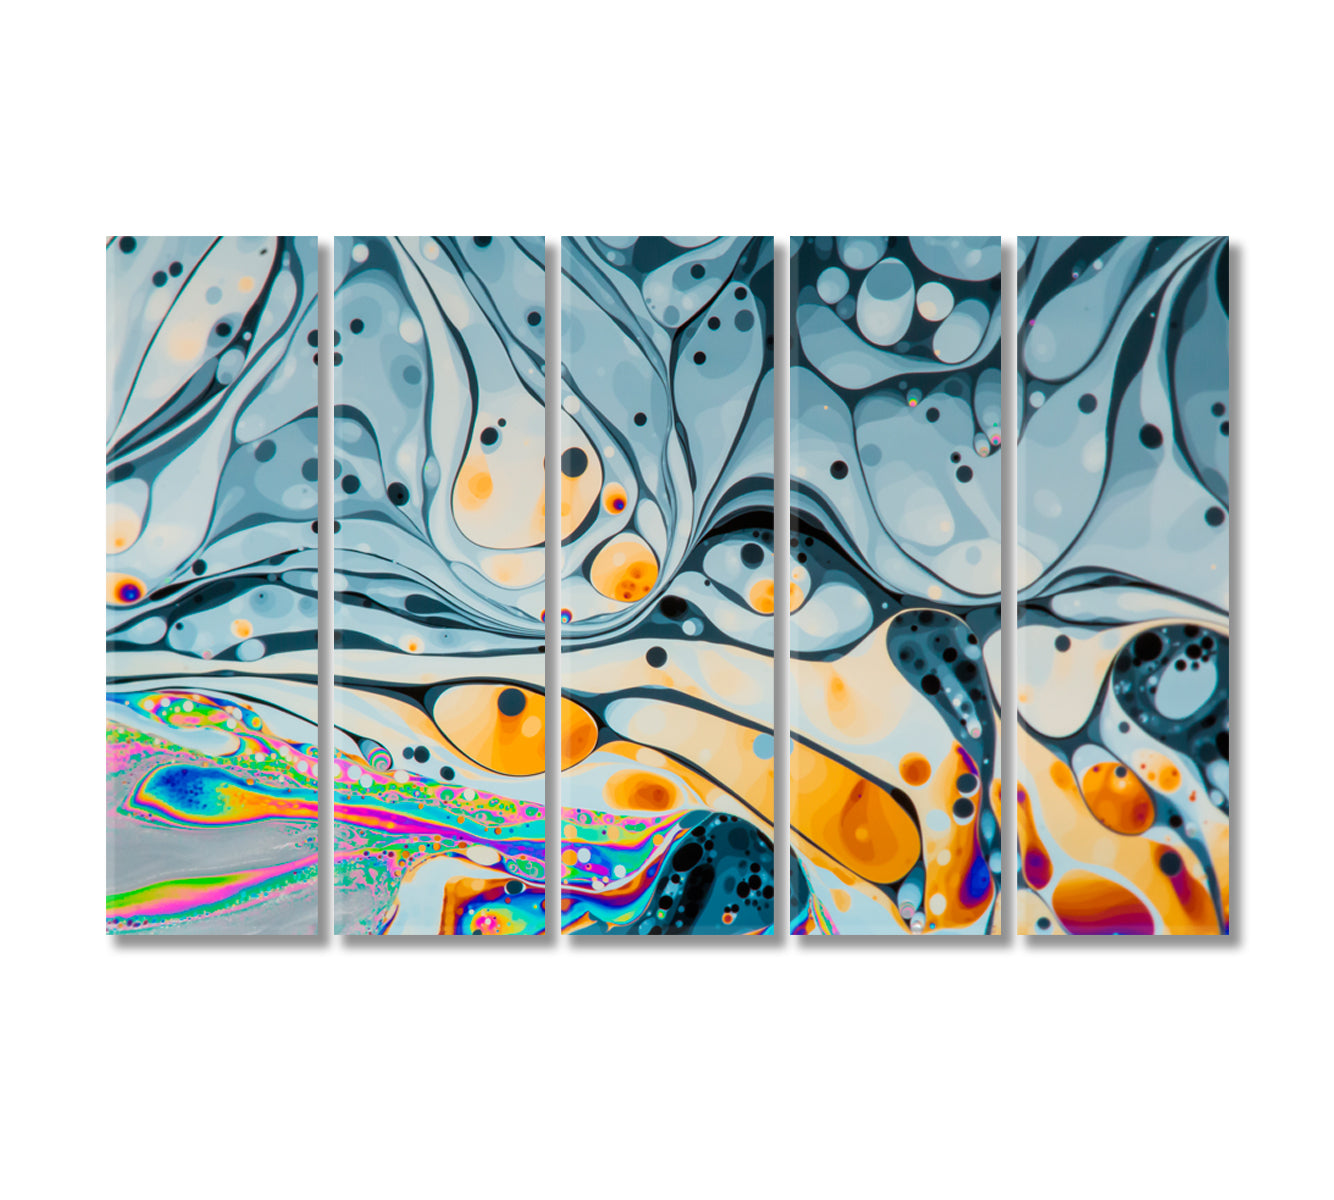 Abstract Psychedelic Soap Bubble Canvas Print-Canvas Print-CetArt-5 Panels-36x24 inches-CetArt